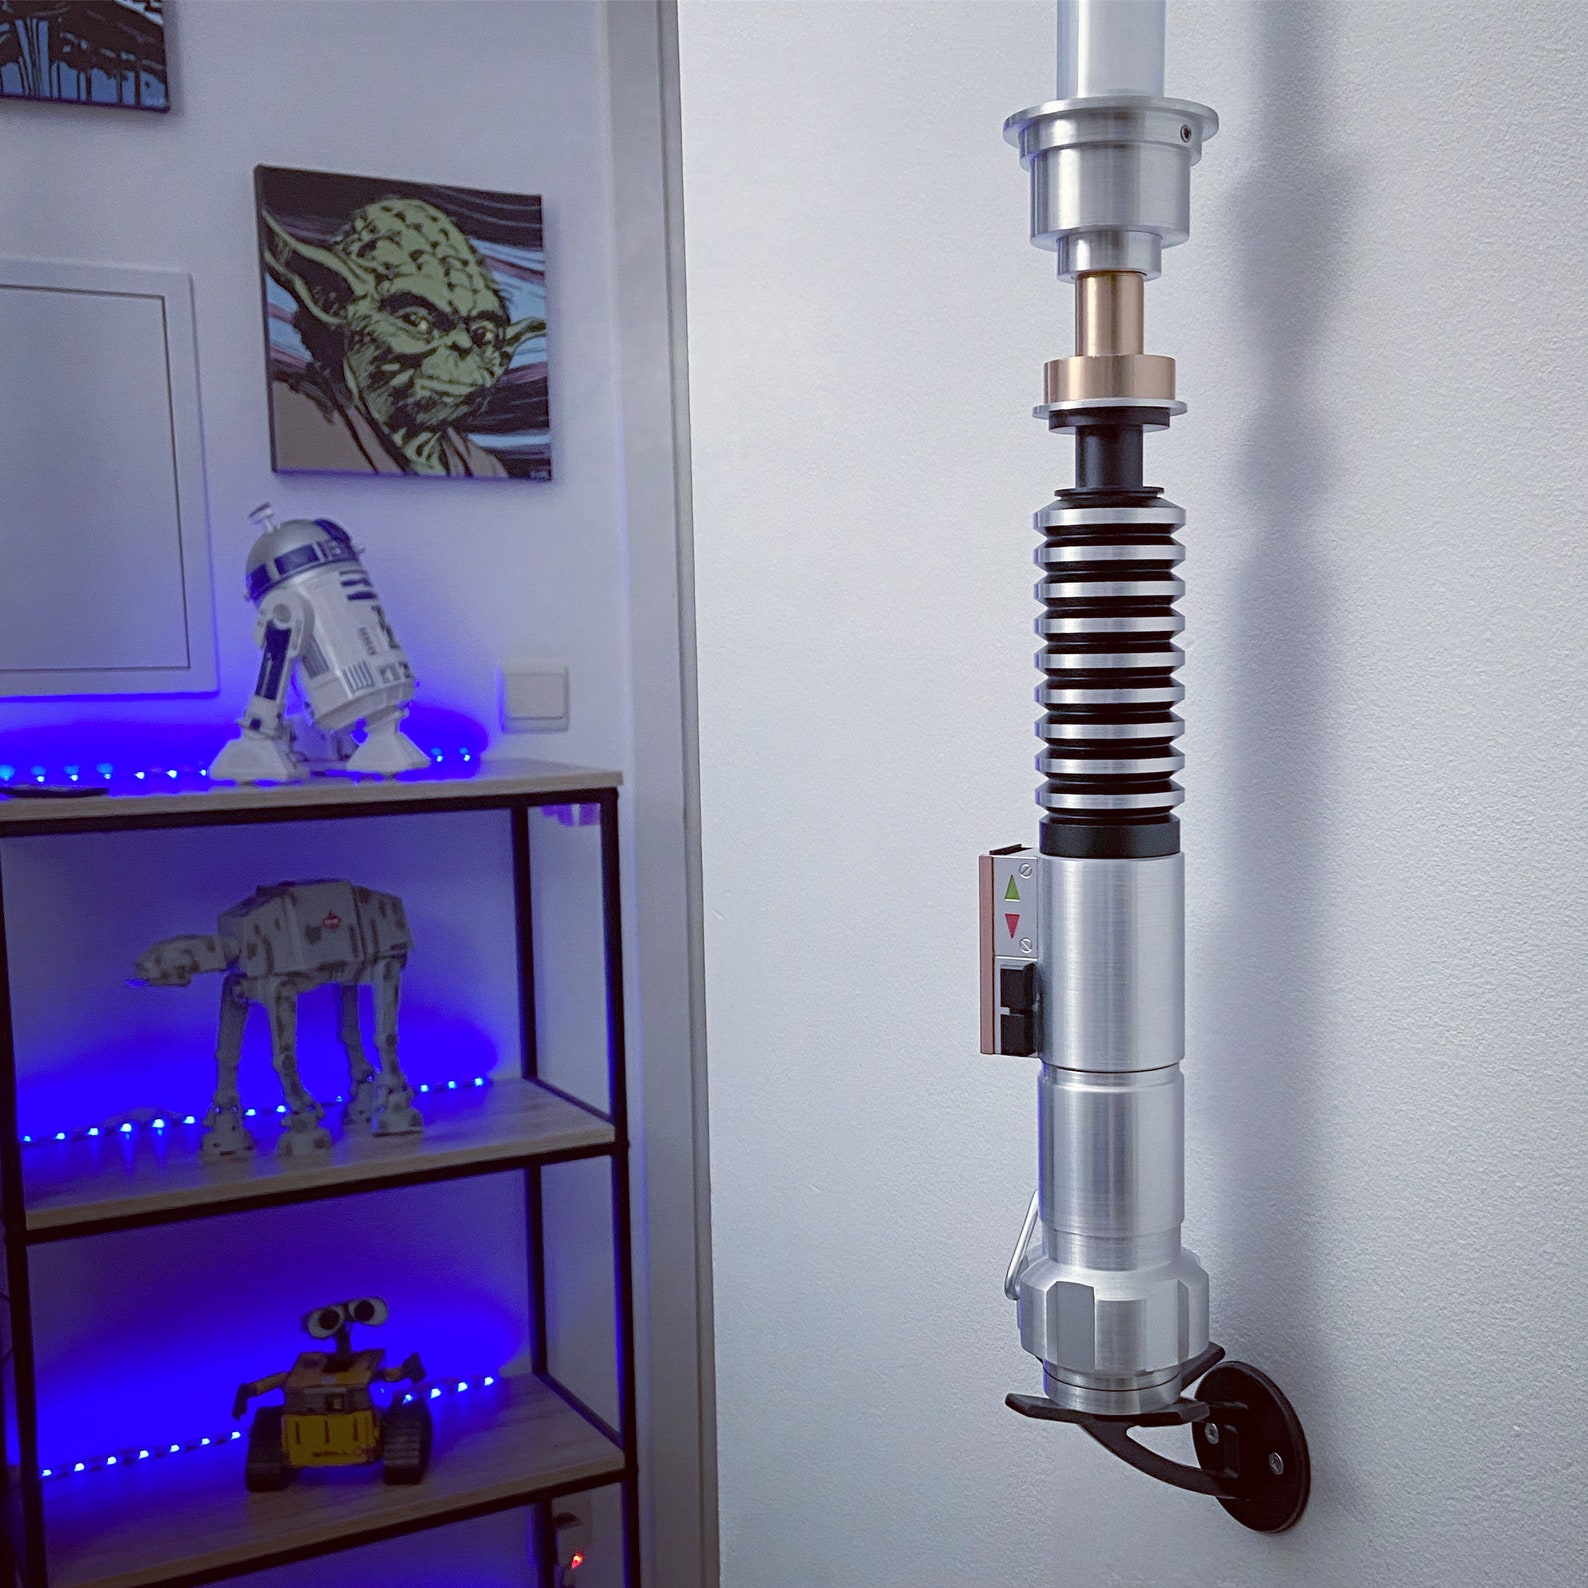 lightsaber-wall-mount-high-quality-finish-etsy